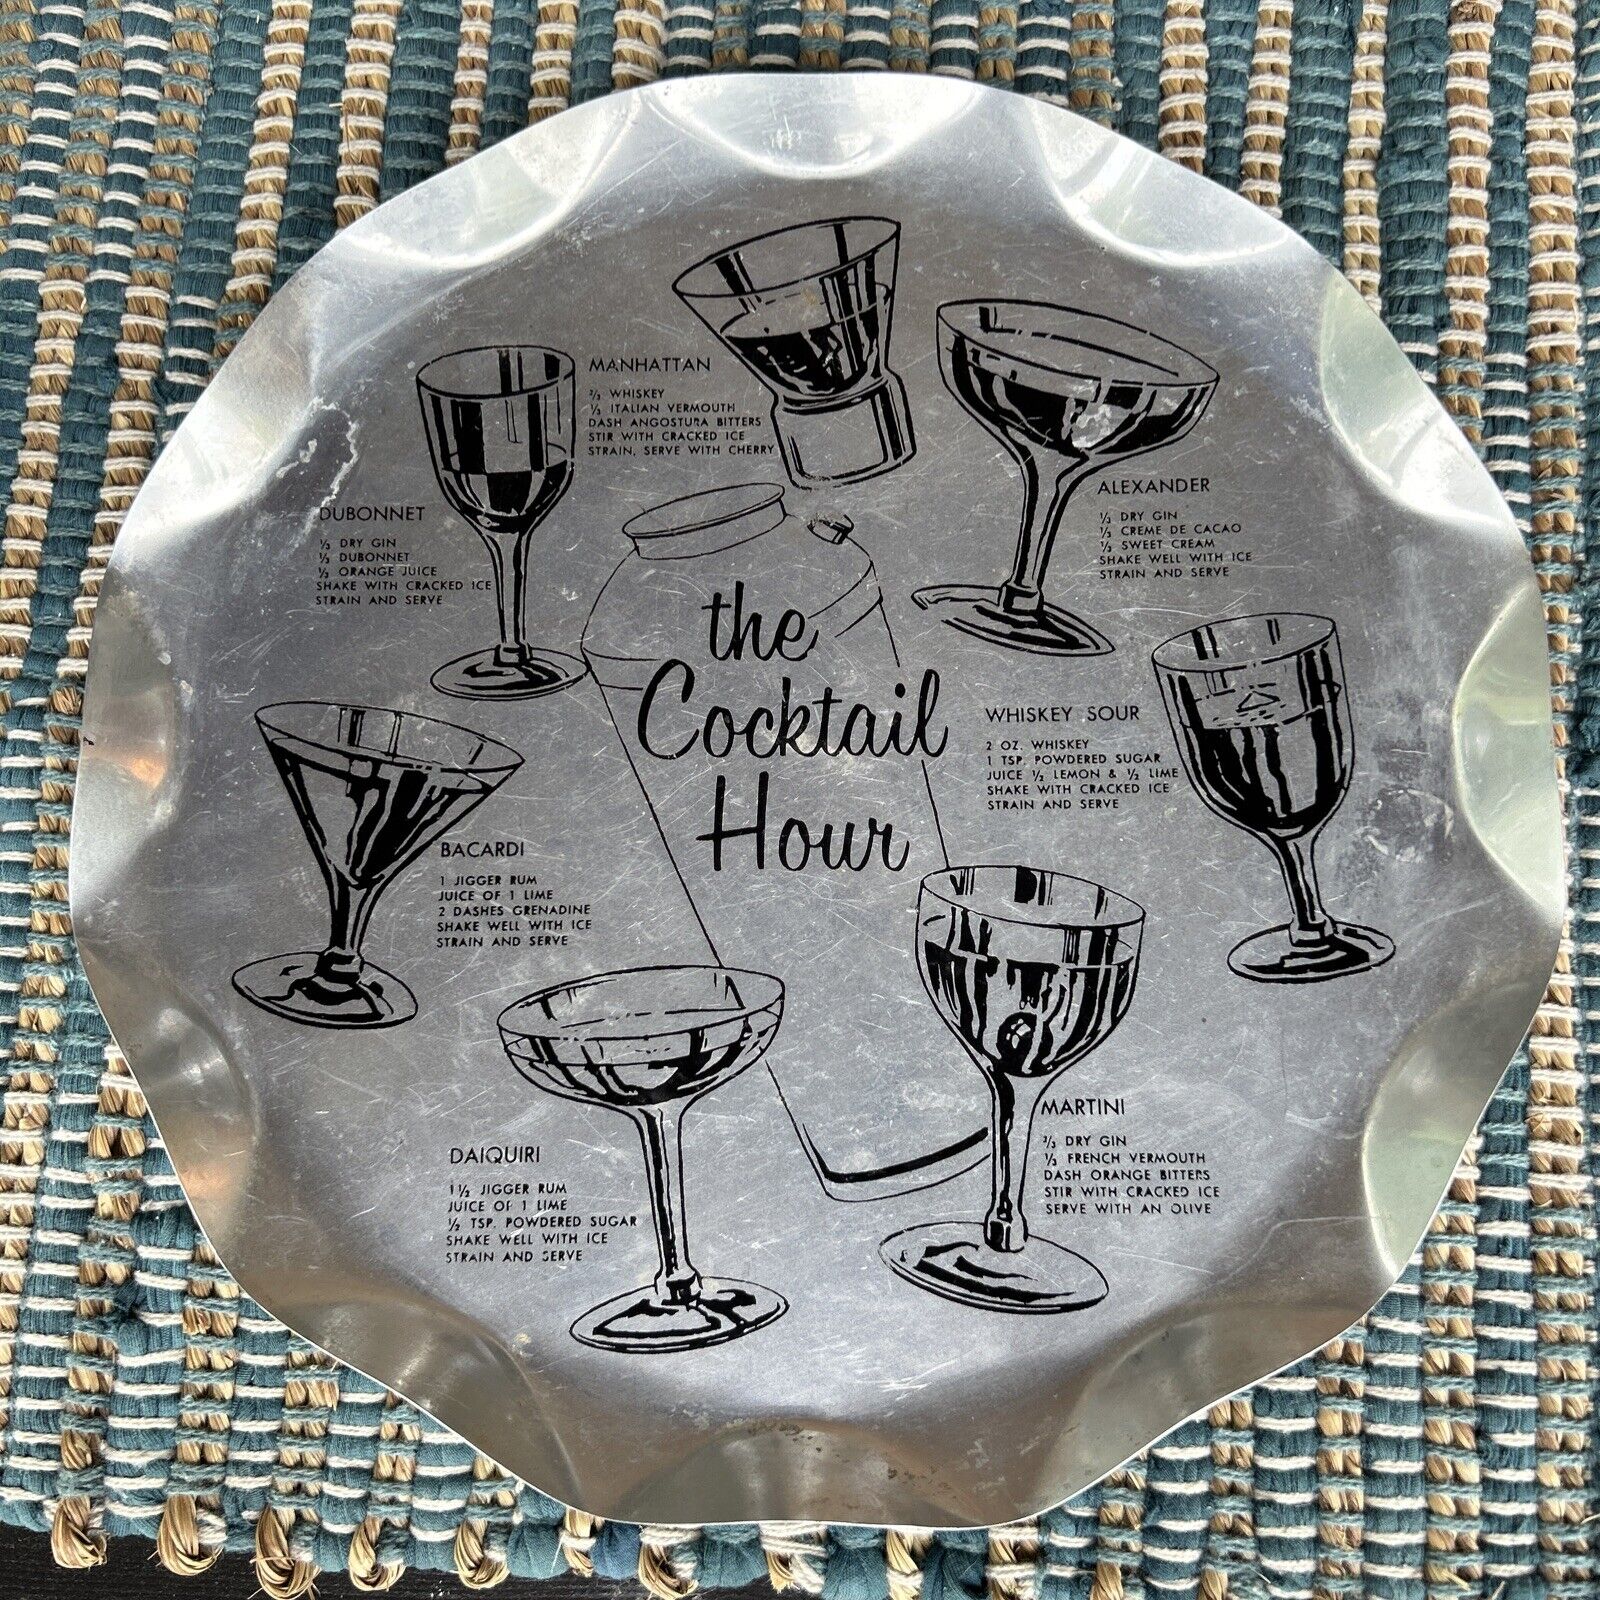 Vintage “The Cocktail Hour” Aluminum Tray Recipes Mid Century Modern Barware